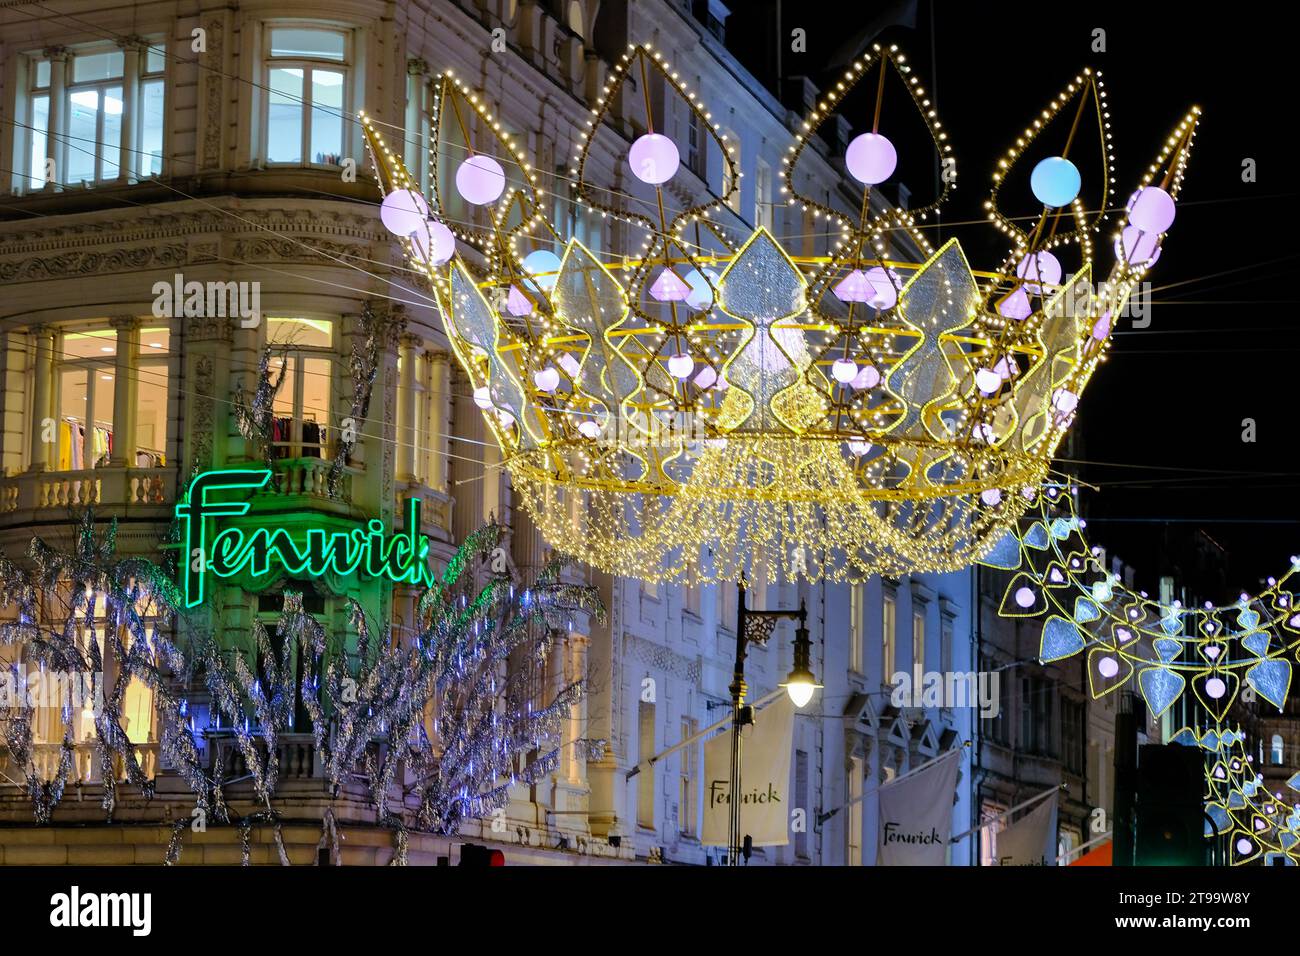 London, UK. 23rd November, 2023. Fenwick department store facade with crown street light decoration. Visitors and shoppers admire the Christmas shop displays in New Bond Street and Old Bond Street, which also features festive lights inspired by the Crown Jewels. Credit: Eleventh Hour Photography/Alamy Live News Stock Photo